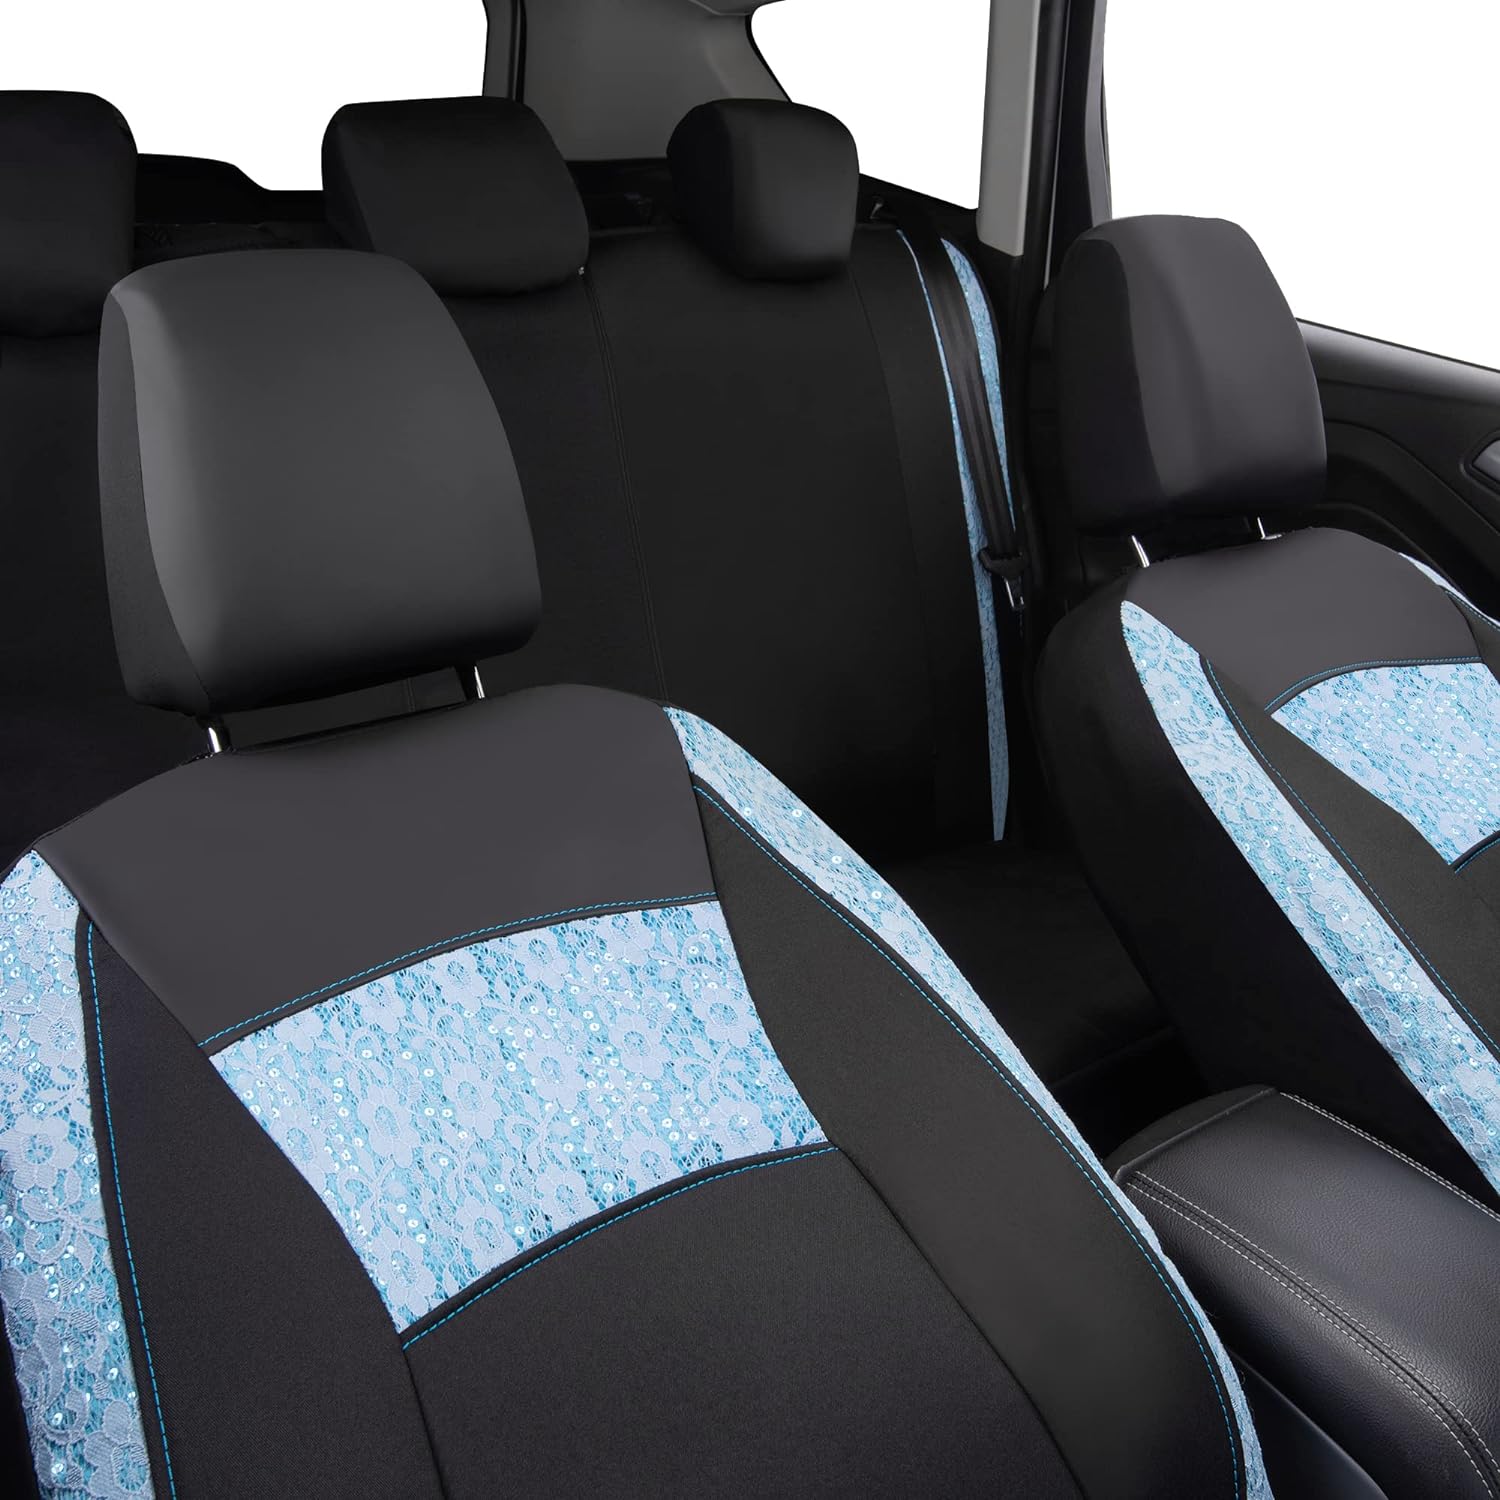 CAR PASS Gabardine Leather Lace Car Seat Covers Full Set, Mint Blue Cute Seat Cover for Women Girl,Universal Fits 95% Cars,Trucks,SUV, Vans, Automotive Compatible with AIRBAG (Black Mint Blue)